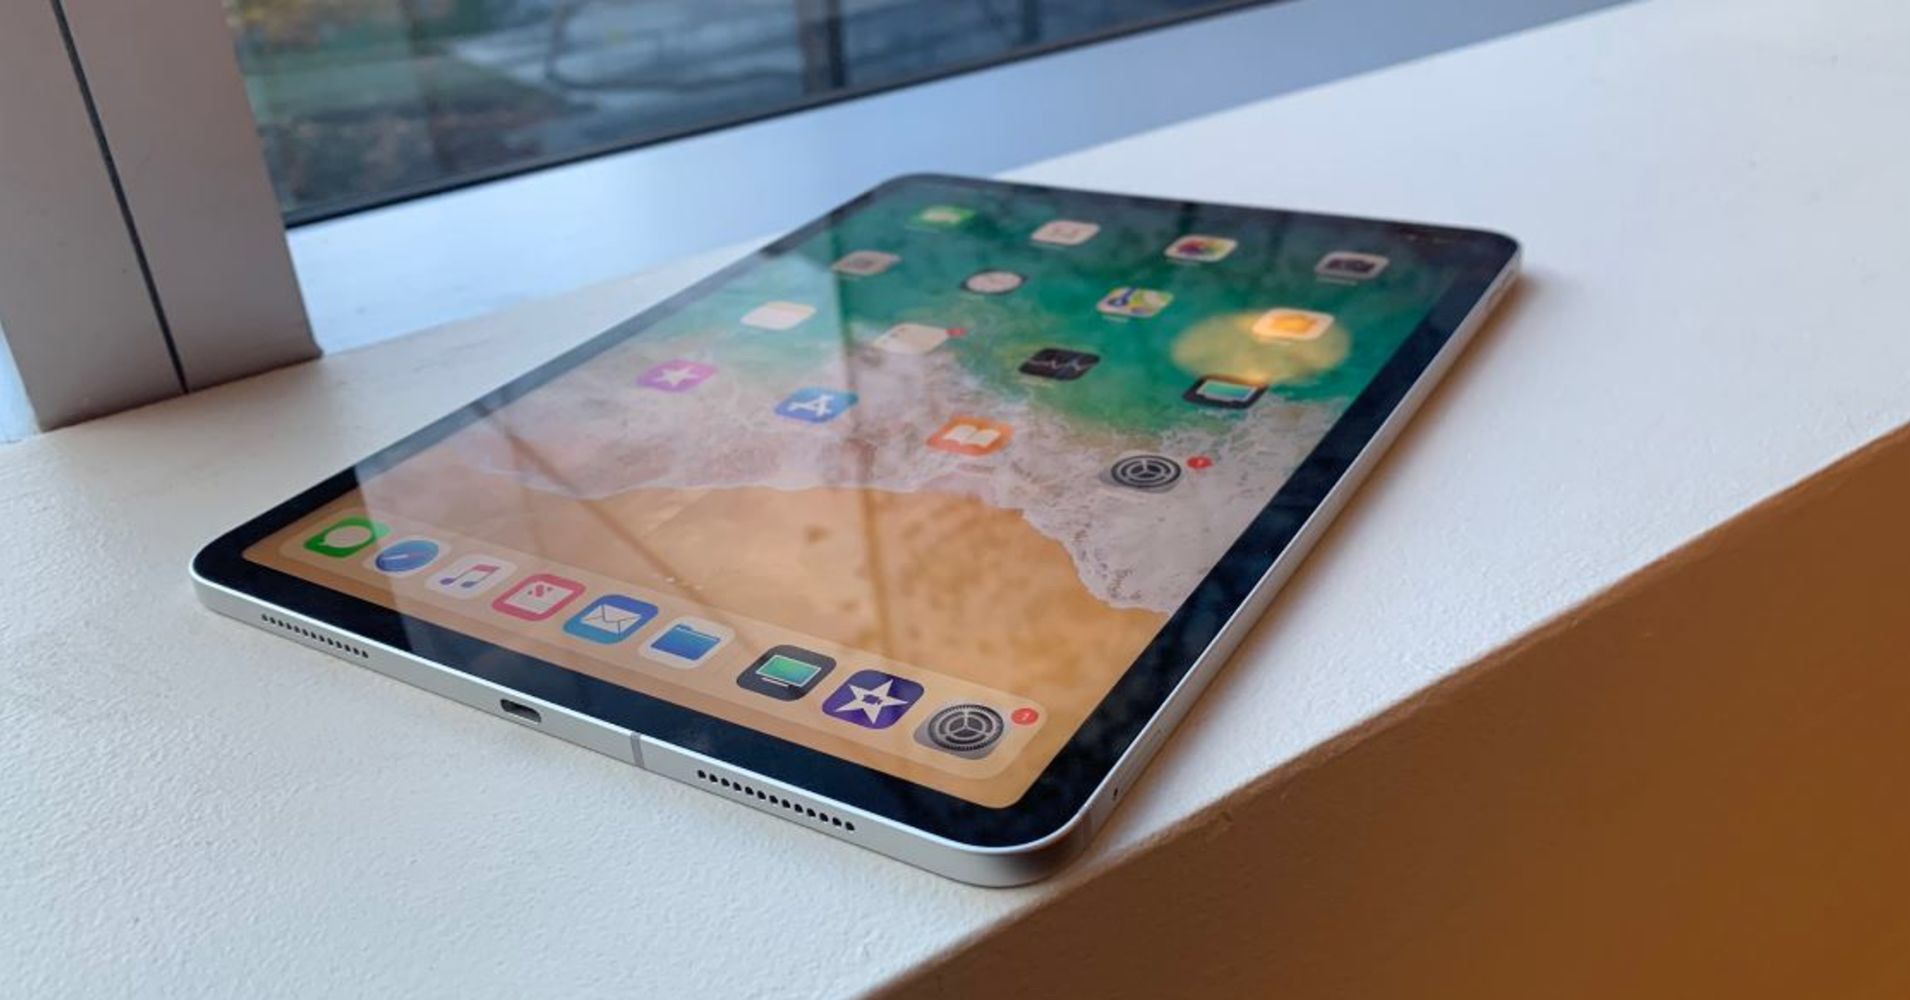 2019 Ipad pro 11.5 inch 64 gig with otter box and apple pencil